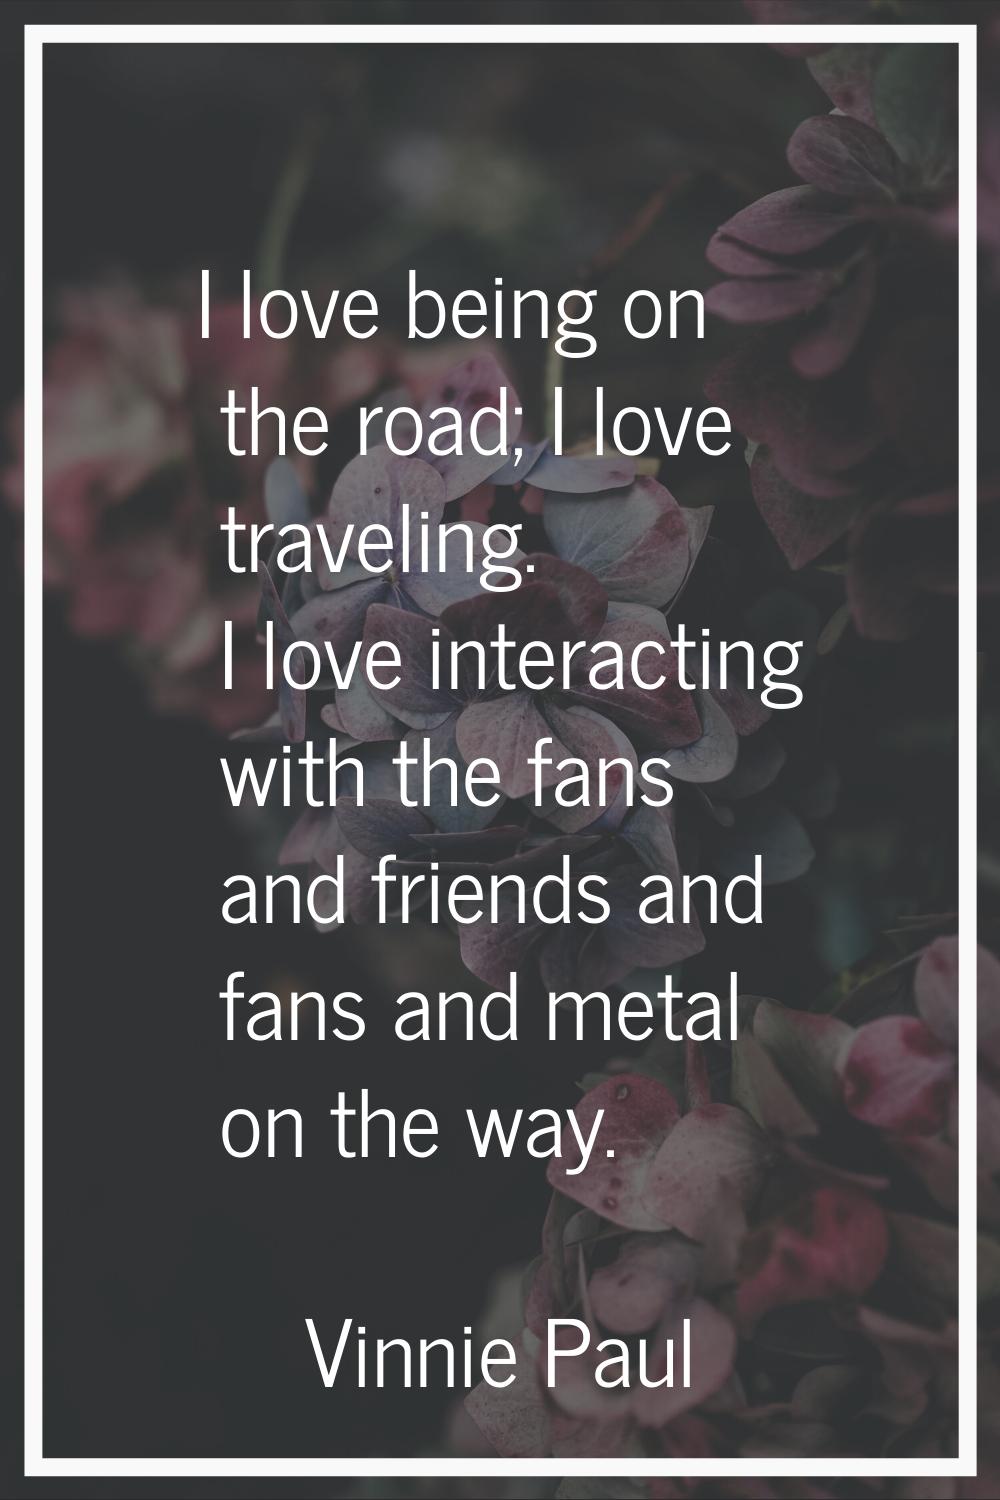 I love being on the road; I love traveling. I love interacting with the fans and friends and fans a